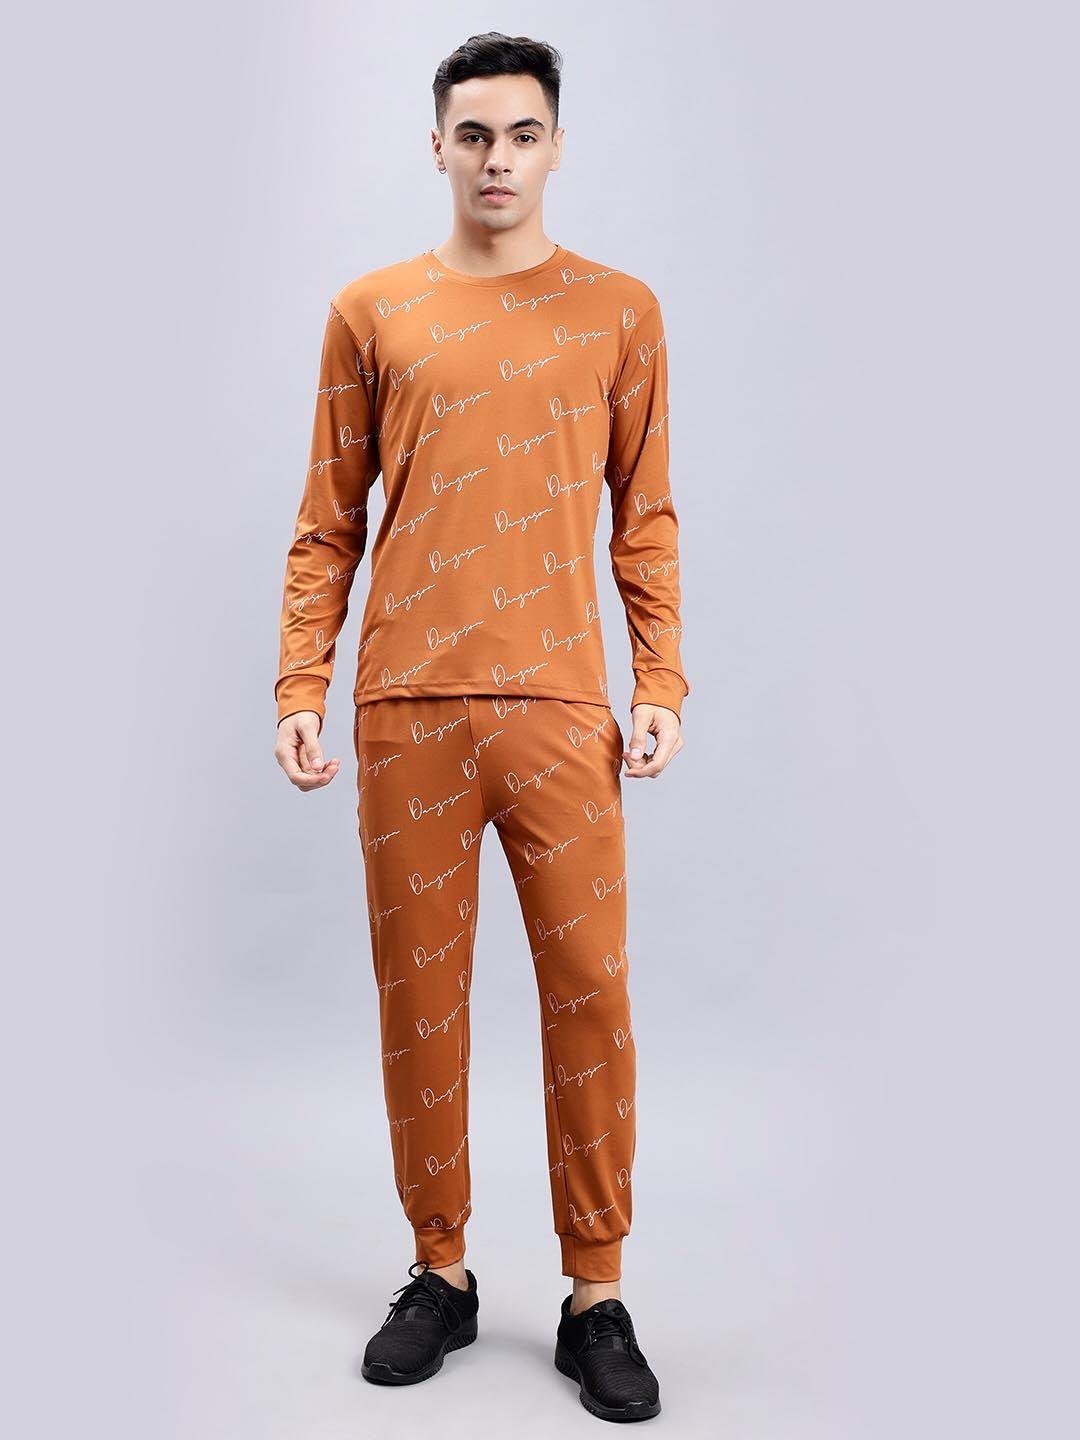 danza-son typography printed round neck tracksuit